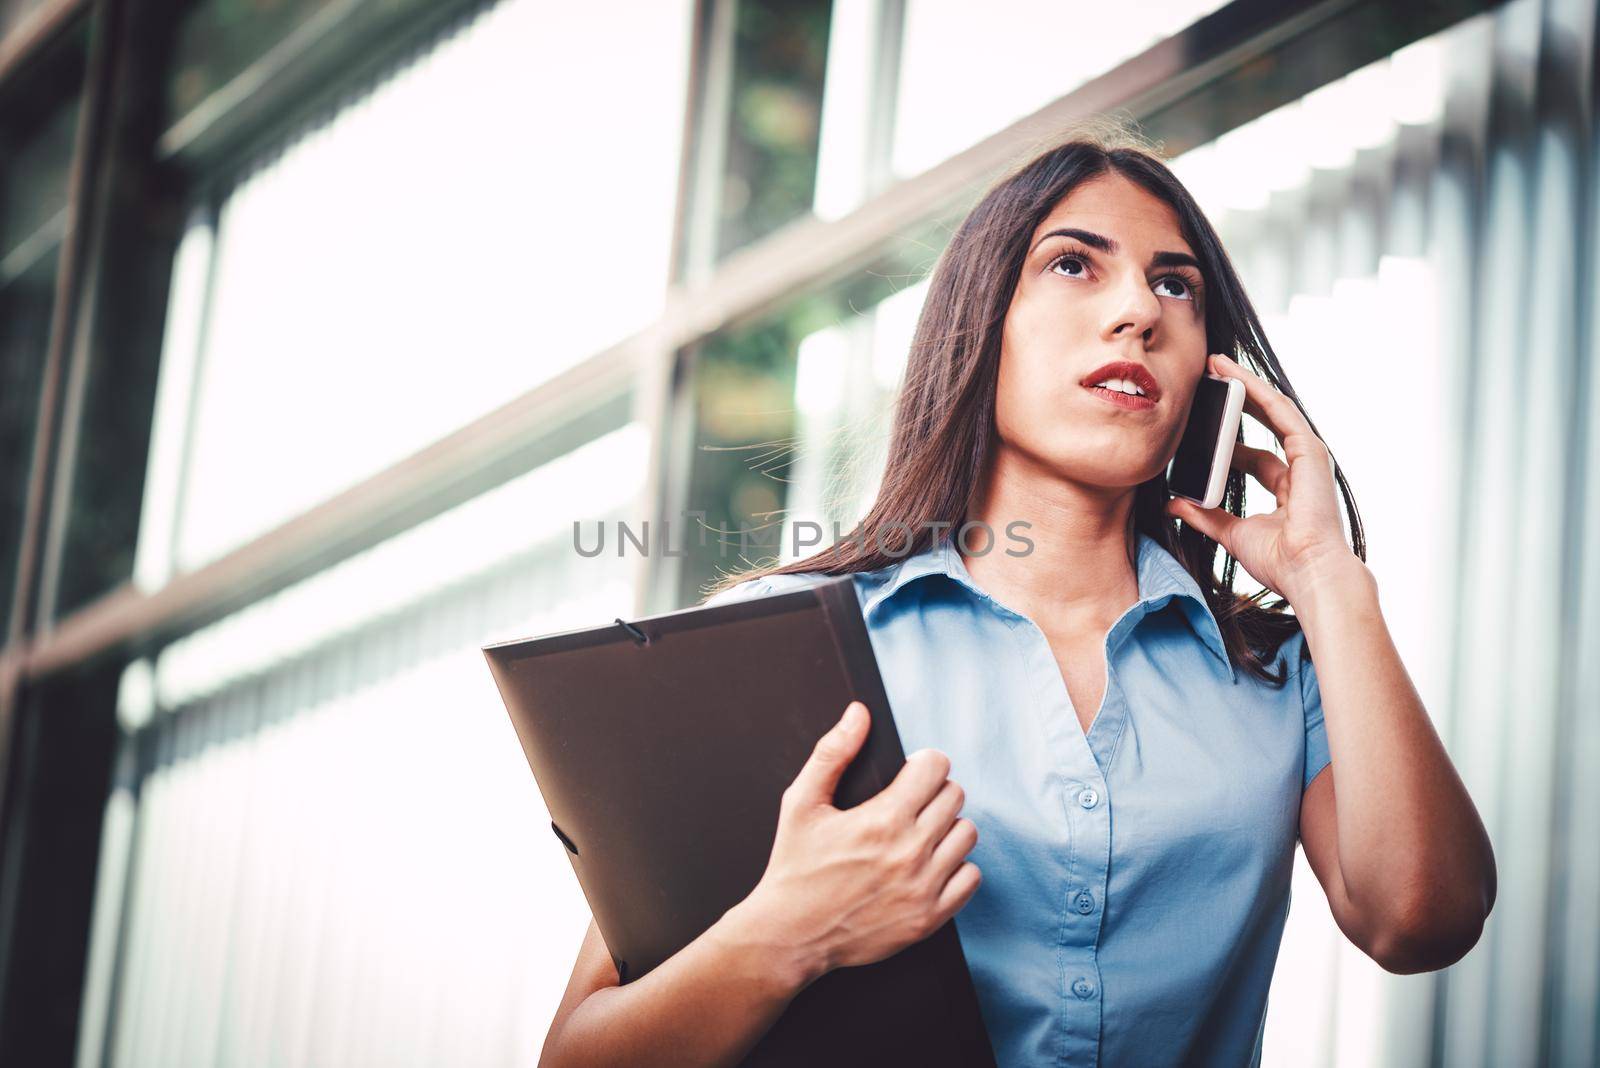 Emotional portrait of a pensive and beautiful young businesswoman talking on a smartphone and carries a file document on the background of a business center.